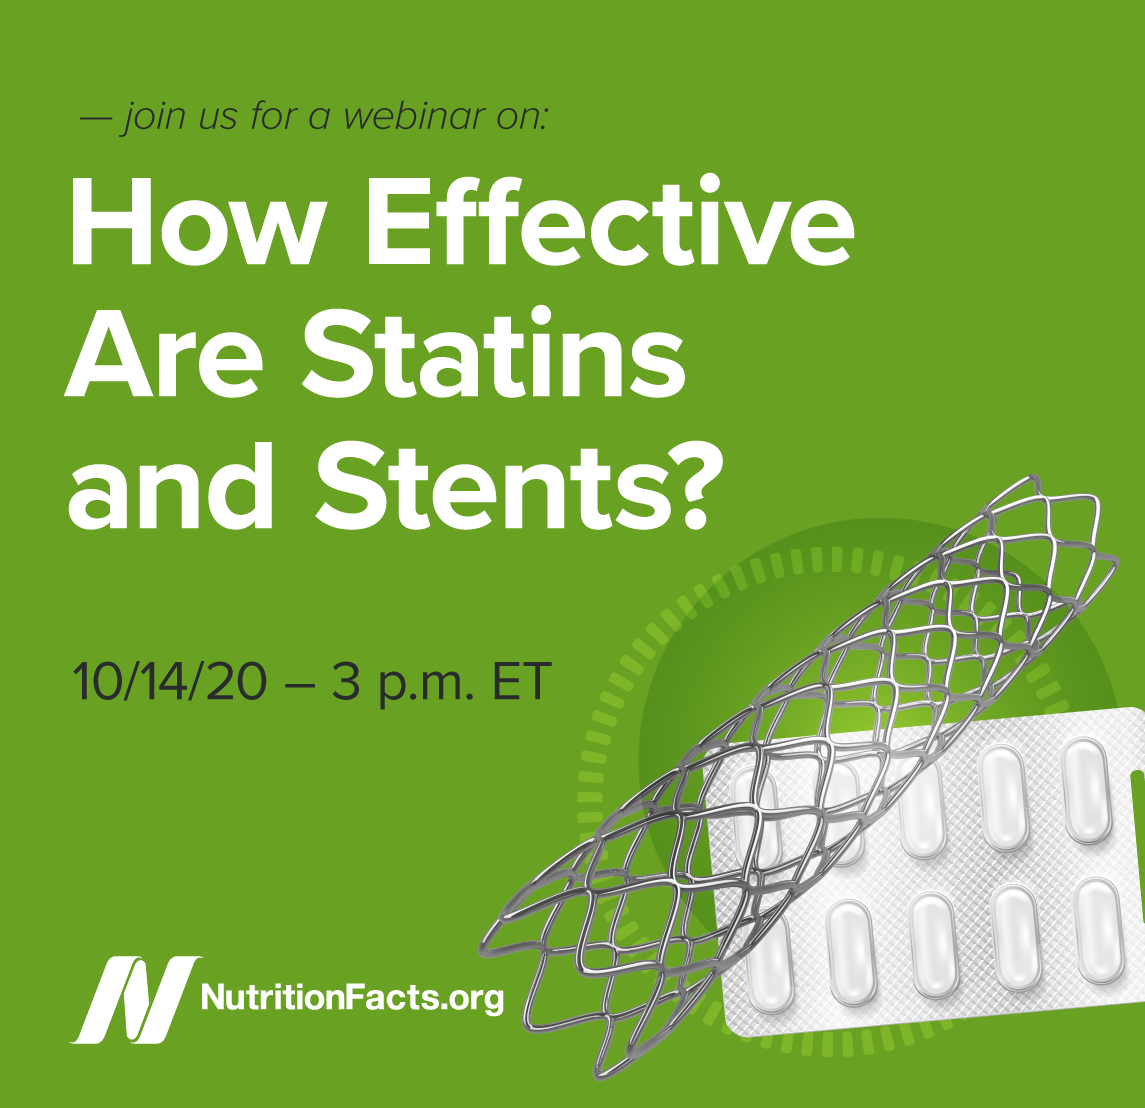 How Effective Are Statins and Stents